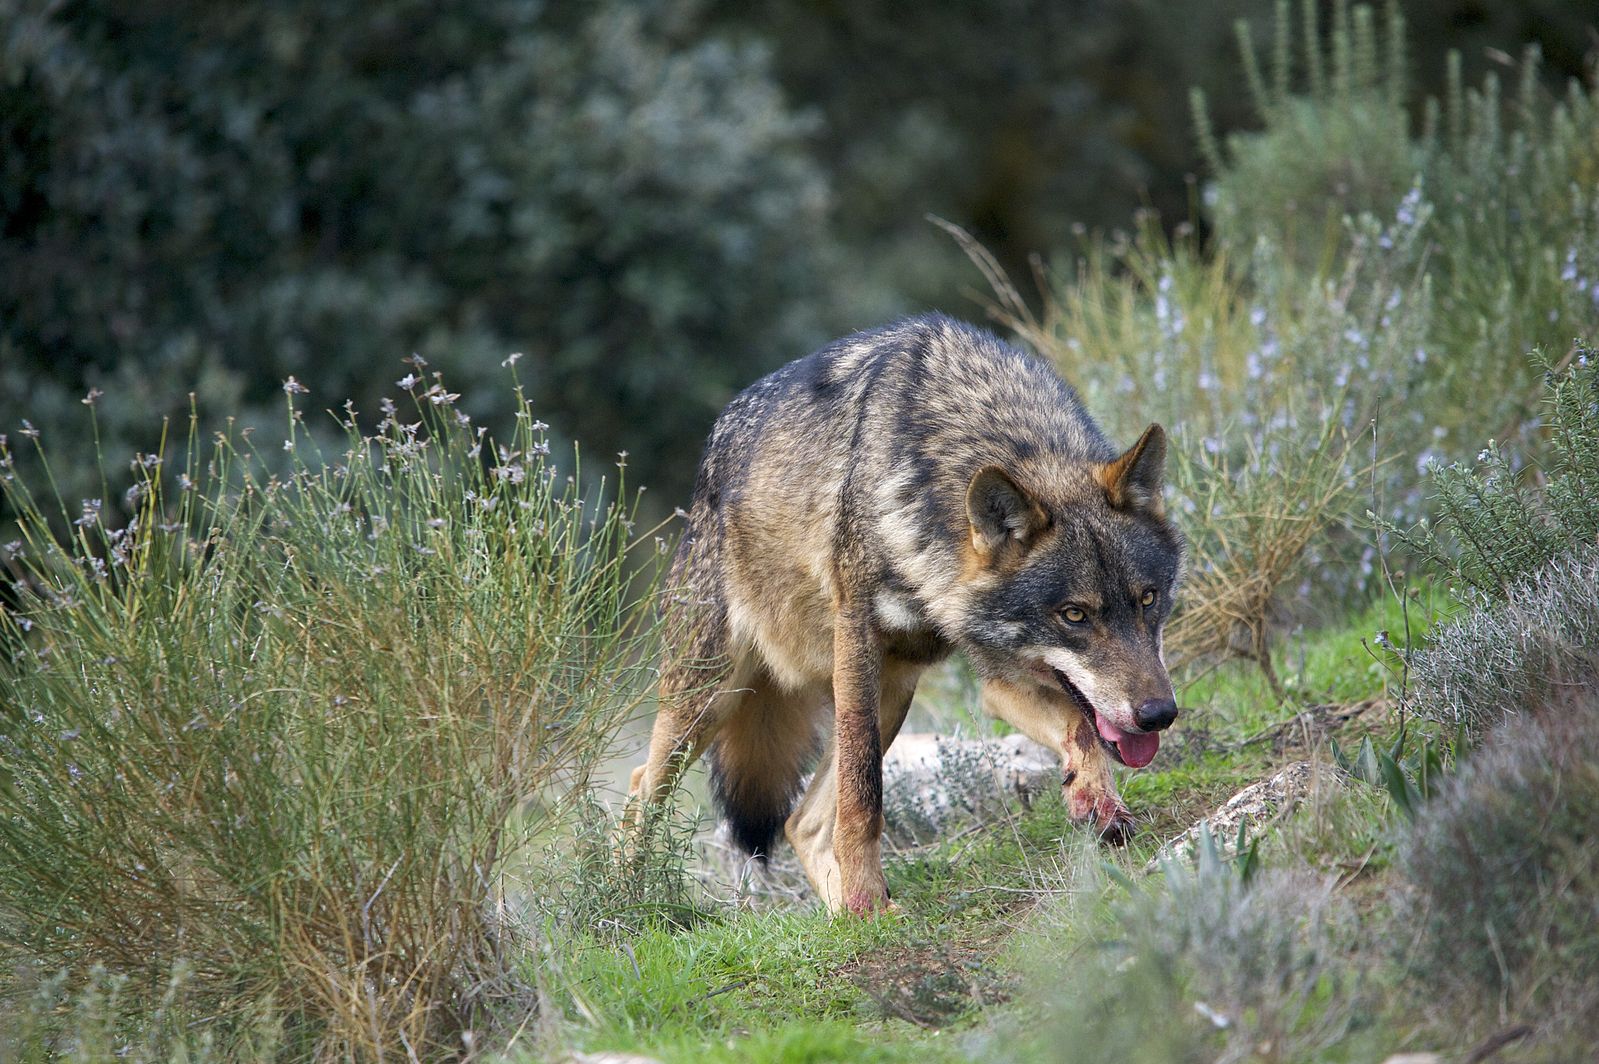 Iberian Wolf (Canis lupus signatus) alpha male in perfect "big bad wolf" pose - head down, eyes fixed, mouth open, forelegs stained with blood.